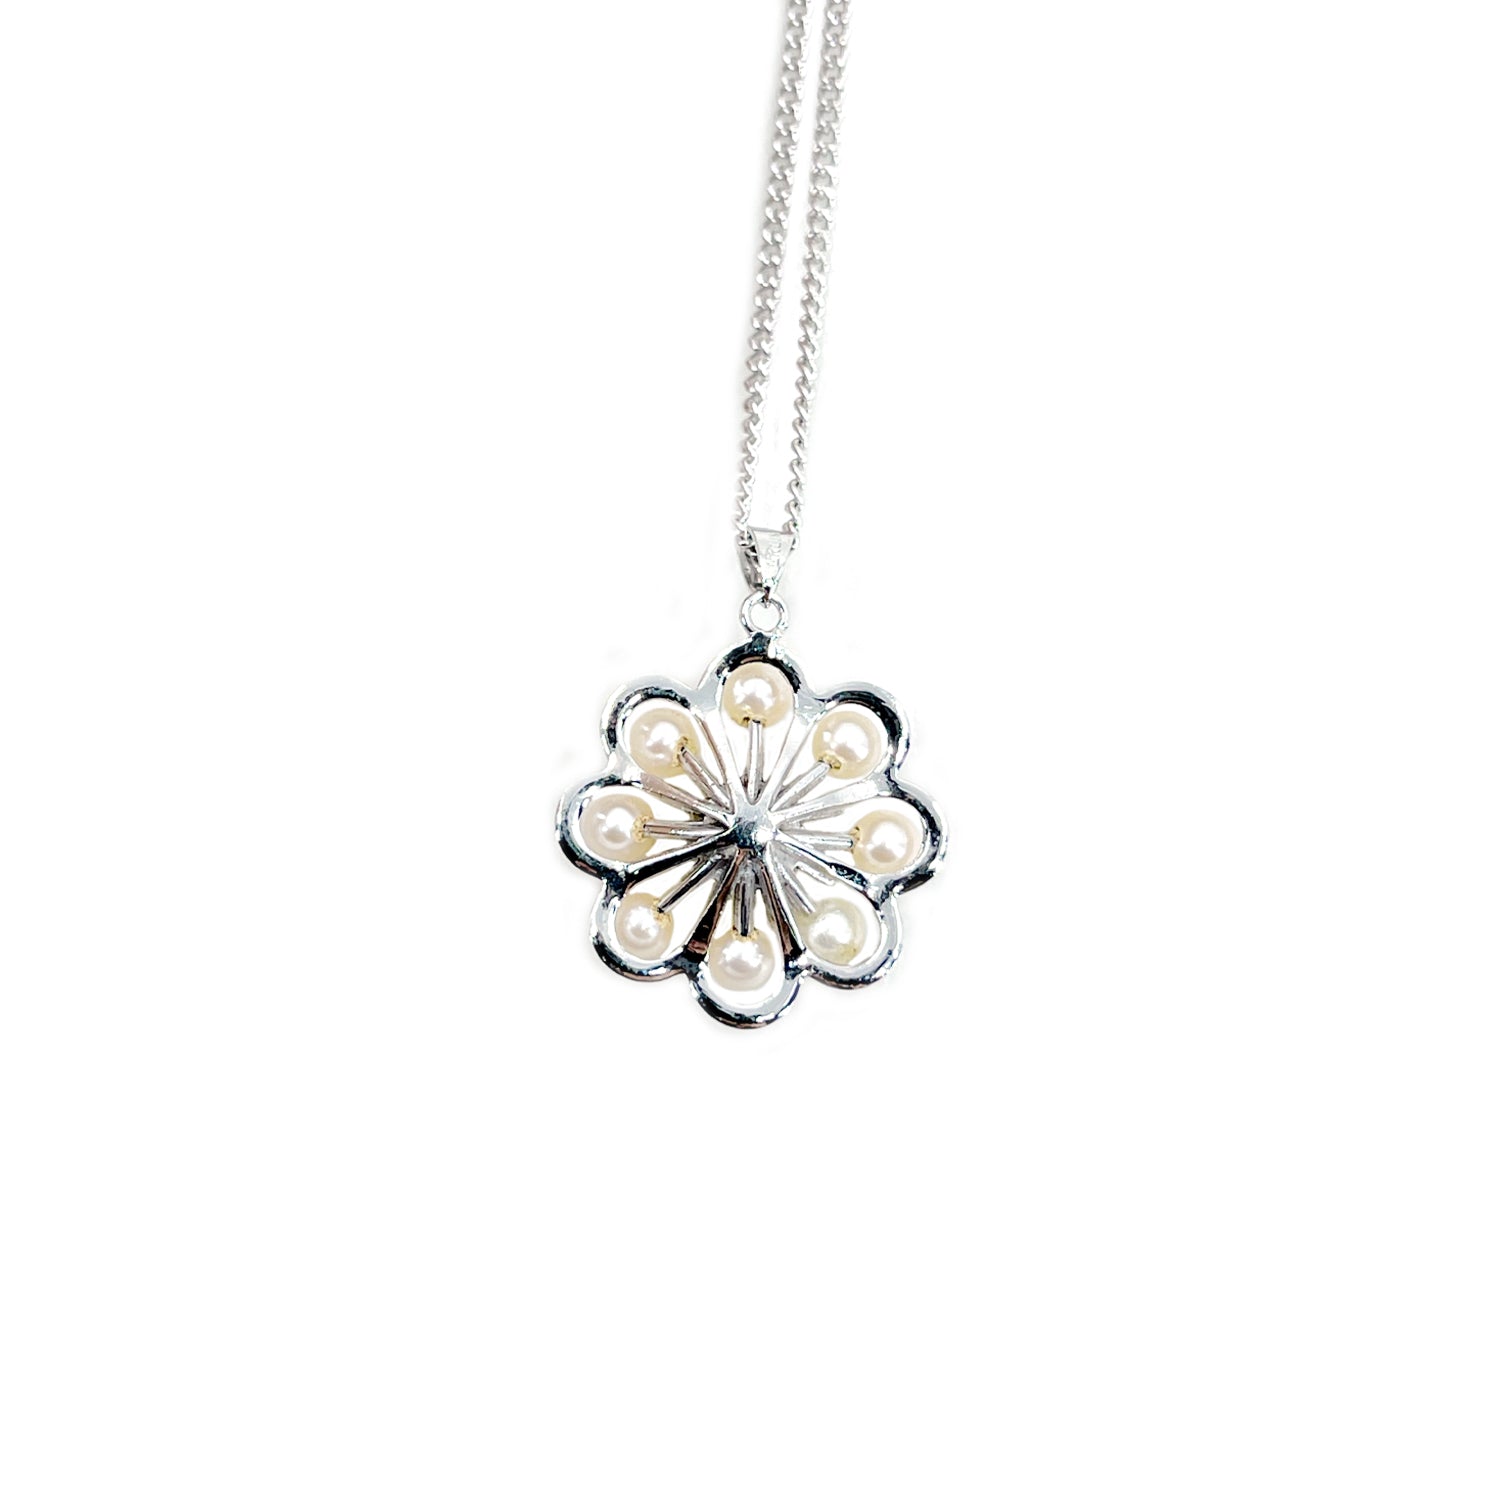 Sakura Cherry Blossom Vintage Japanese Cultured Akoya Pearl Pendant Necklace- Sterling Silver 17.50 Inch